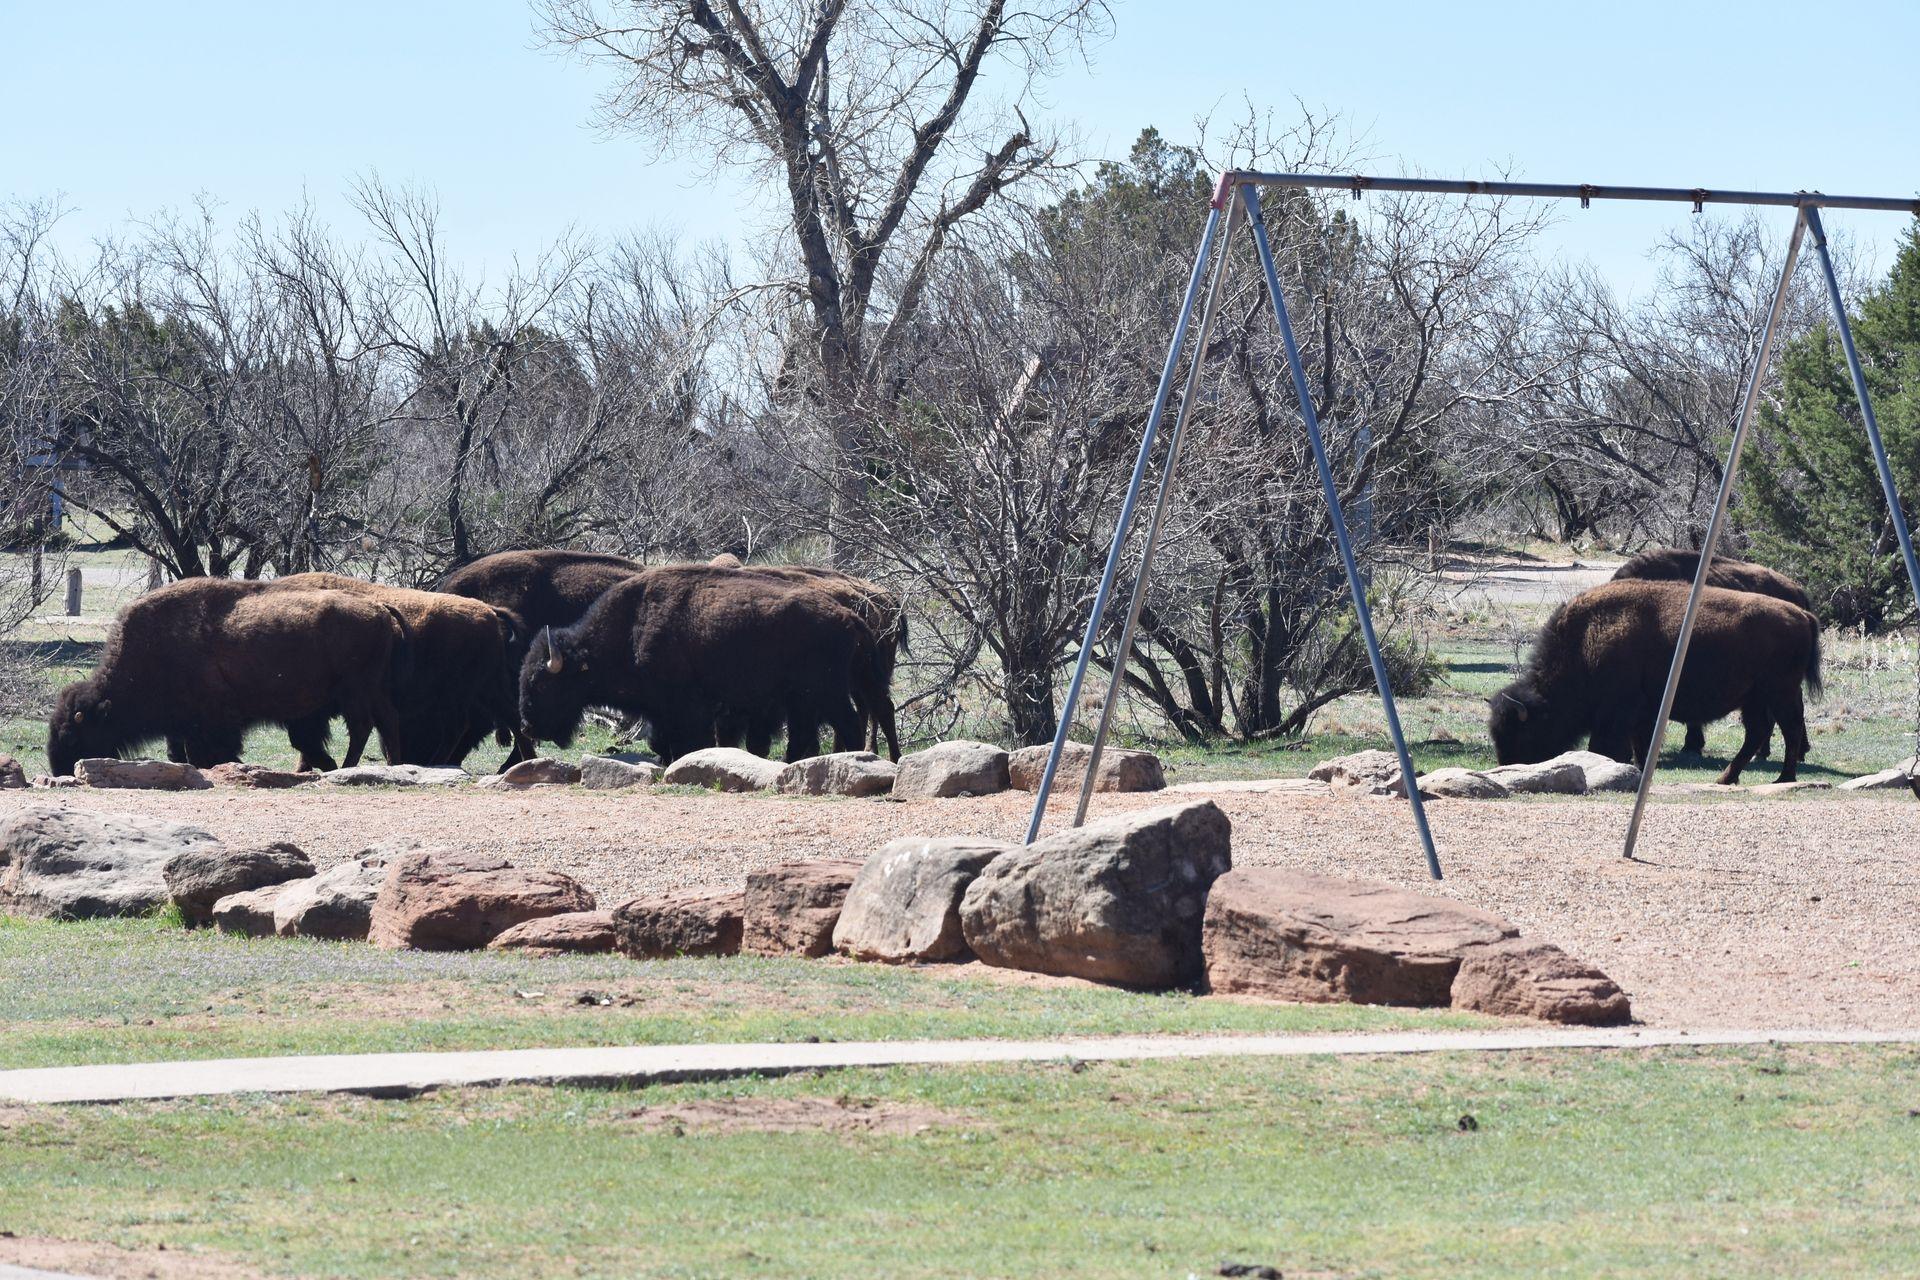 A group of about 6 bison grazing right next to the playground near a Caprock Canyon campground.